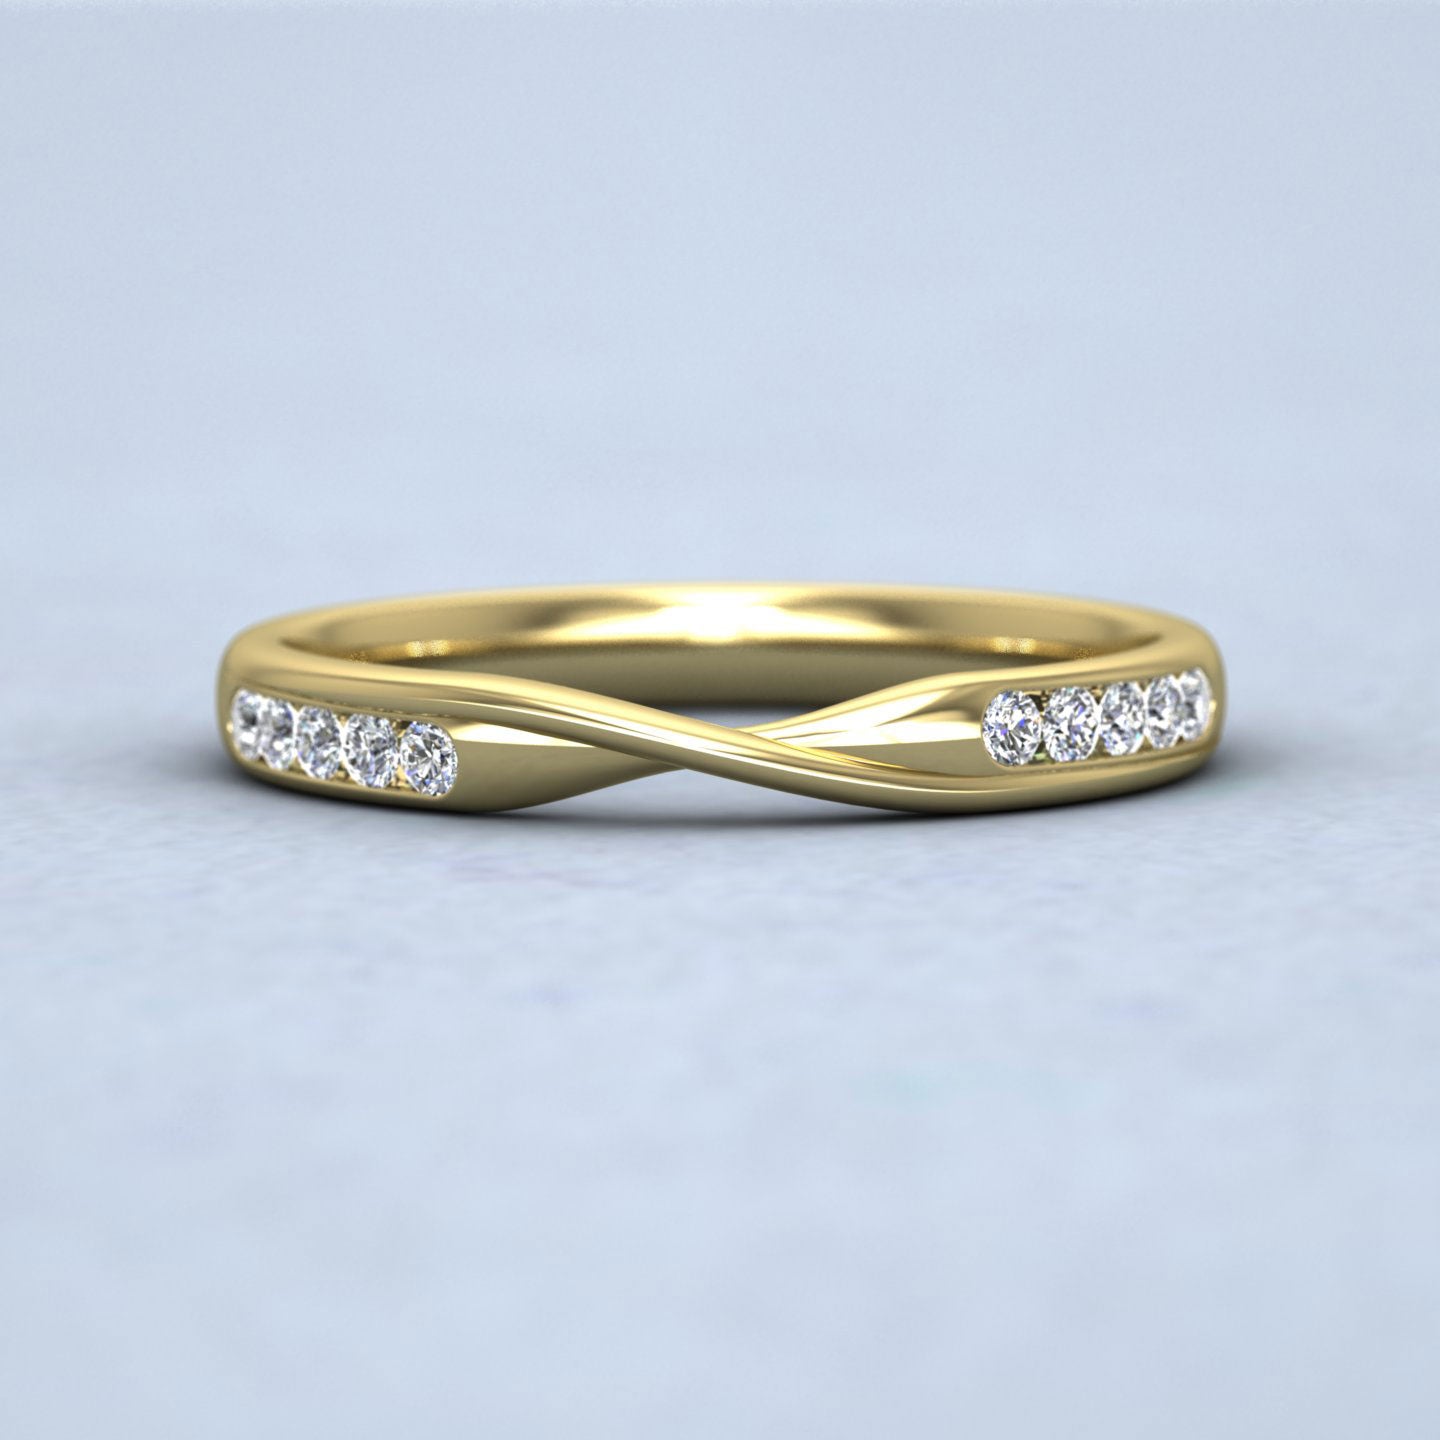 Crossover Pattern Wedding Ring In 9ct Yellow Gold 2.5mm Wide With Eight Diamonds